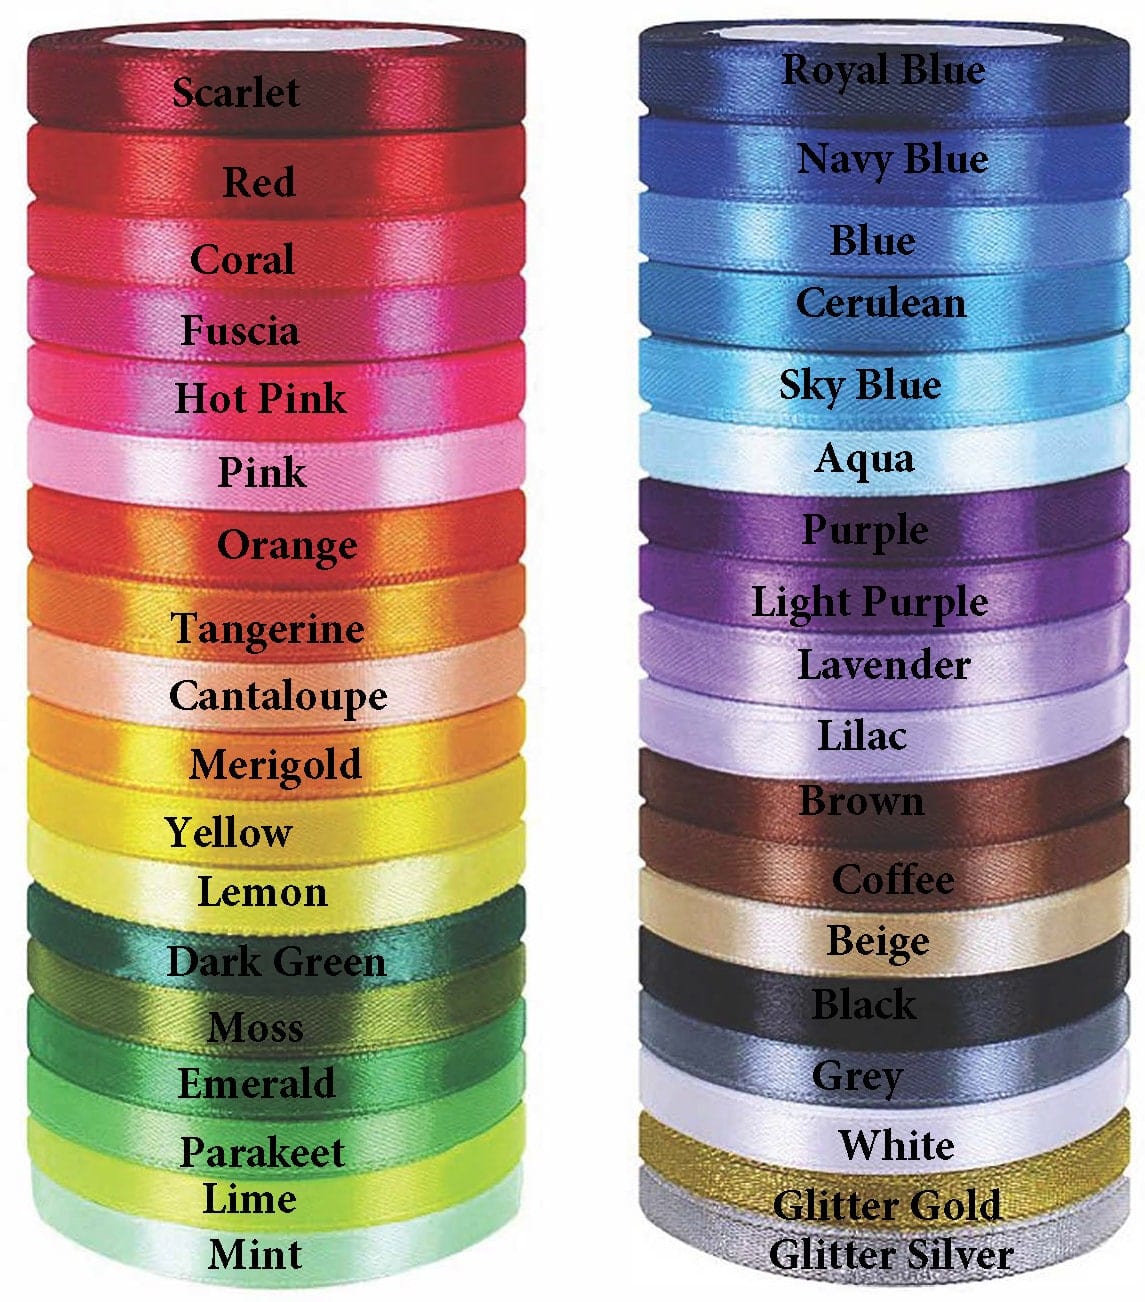 Satin ribbon is made of high-quality polyester, double sided, .4" wide x 25 yrds, smooth surface giving texture, strength, great color!